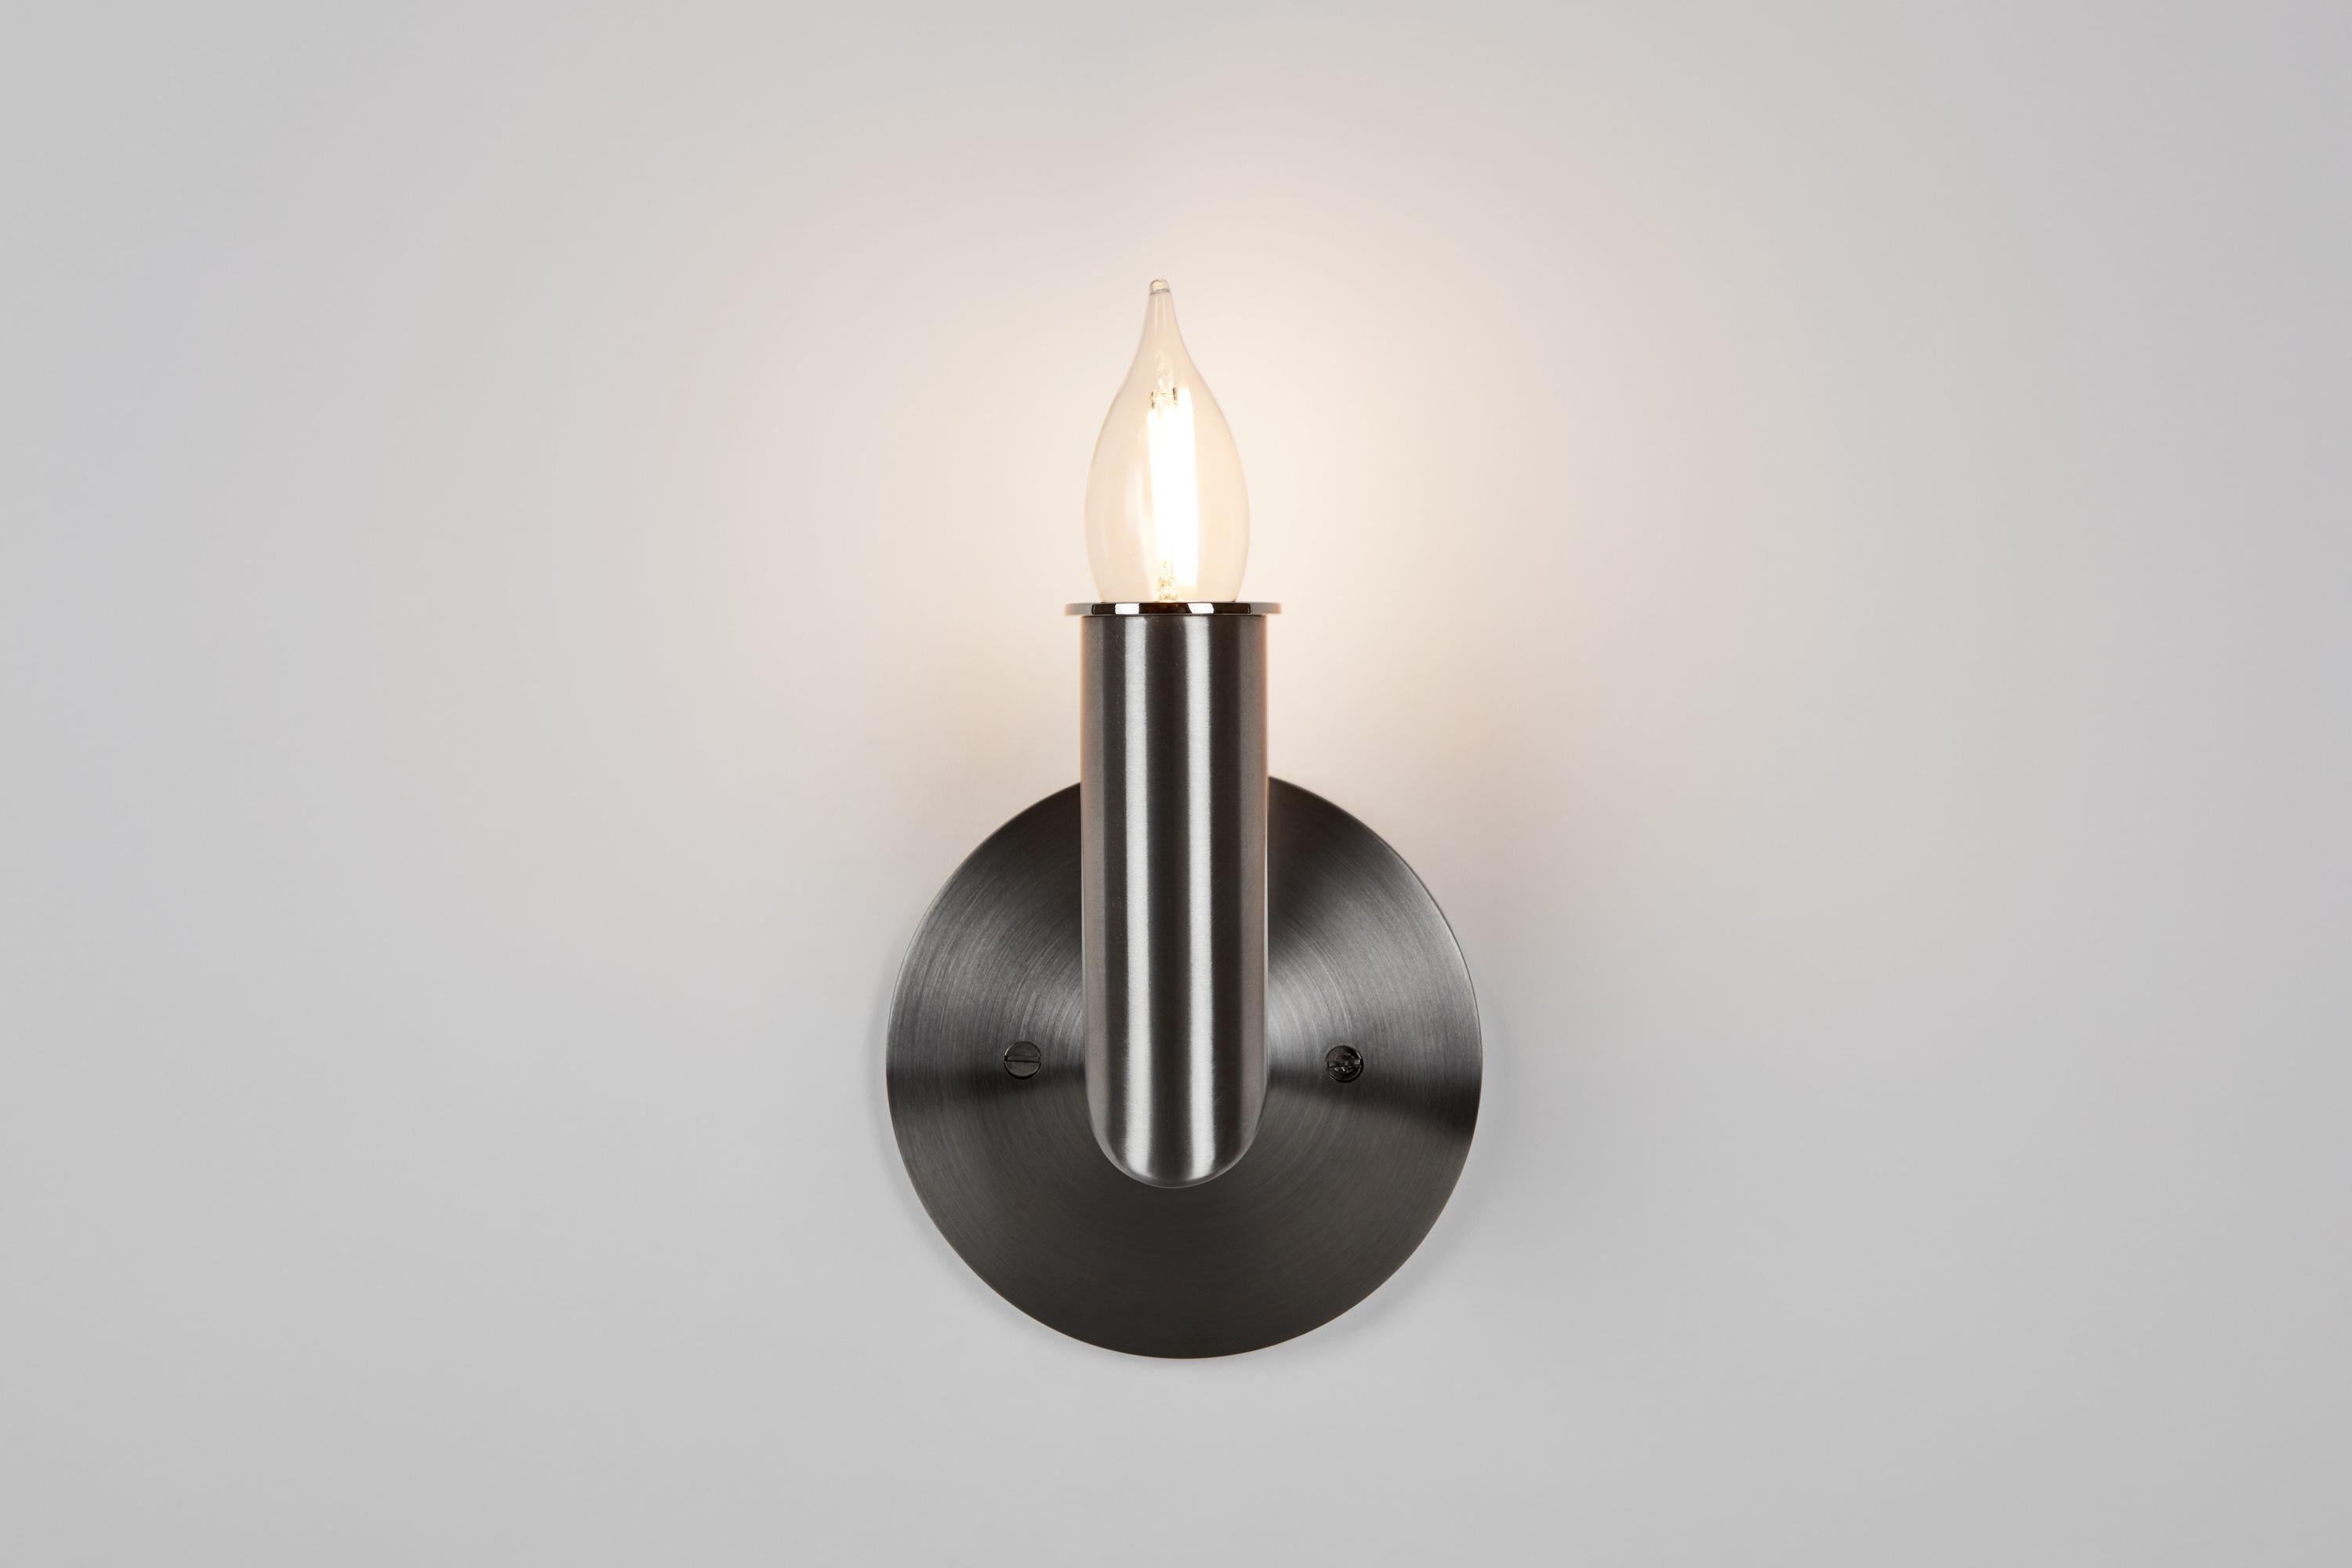 The Candle series started with the question: what type of lighting pairs well with contemporary art? What resulted is this three-pronged, 3-D emoji version of a classical candelabra. Candle’s stainless-steel body was produced in upstate New York by